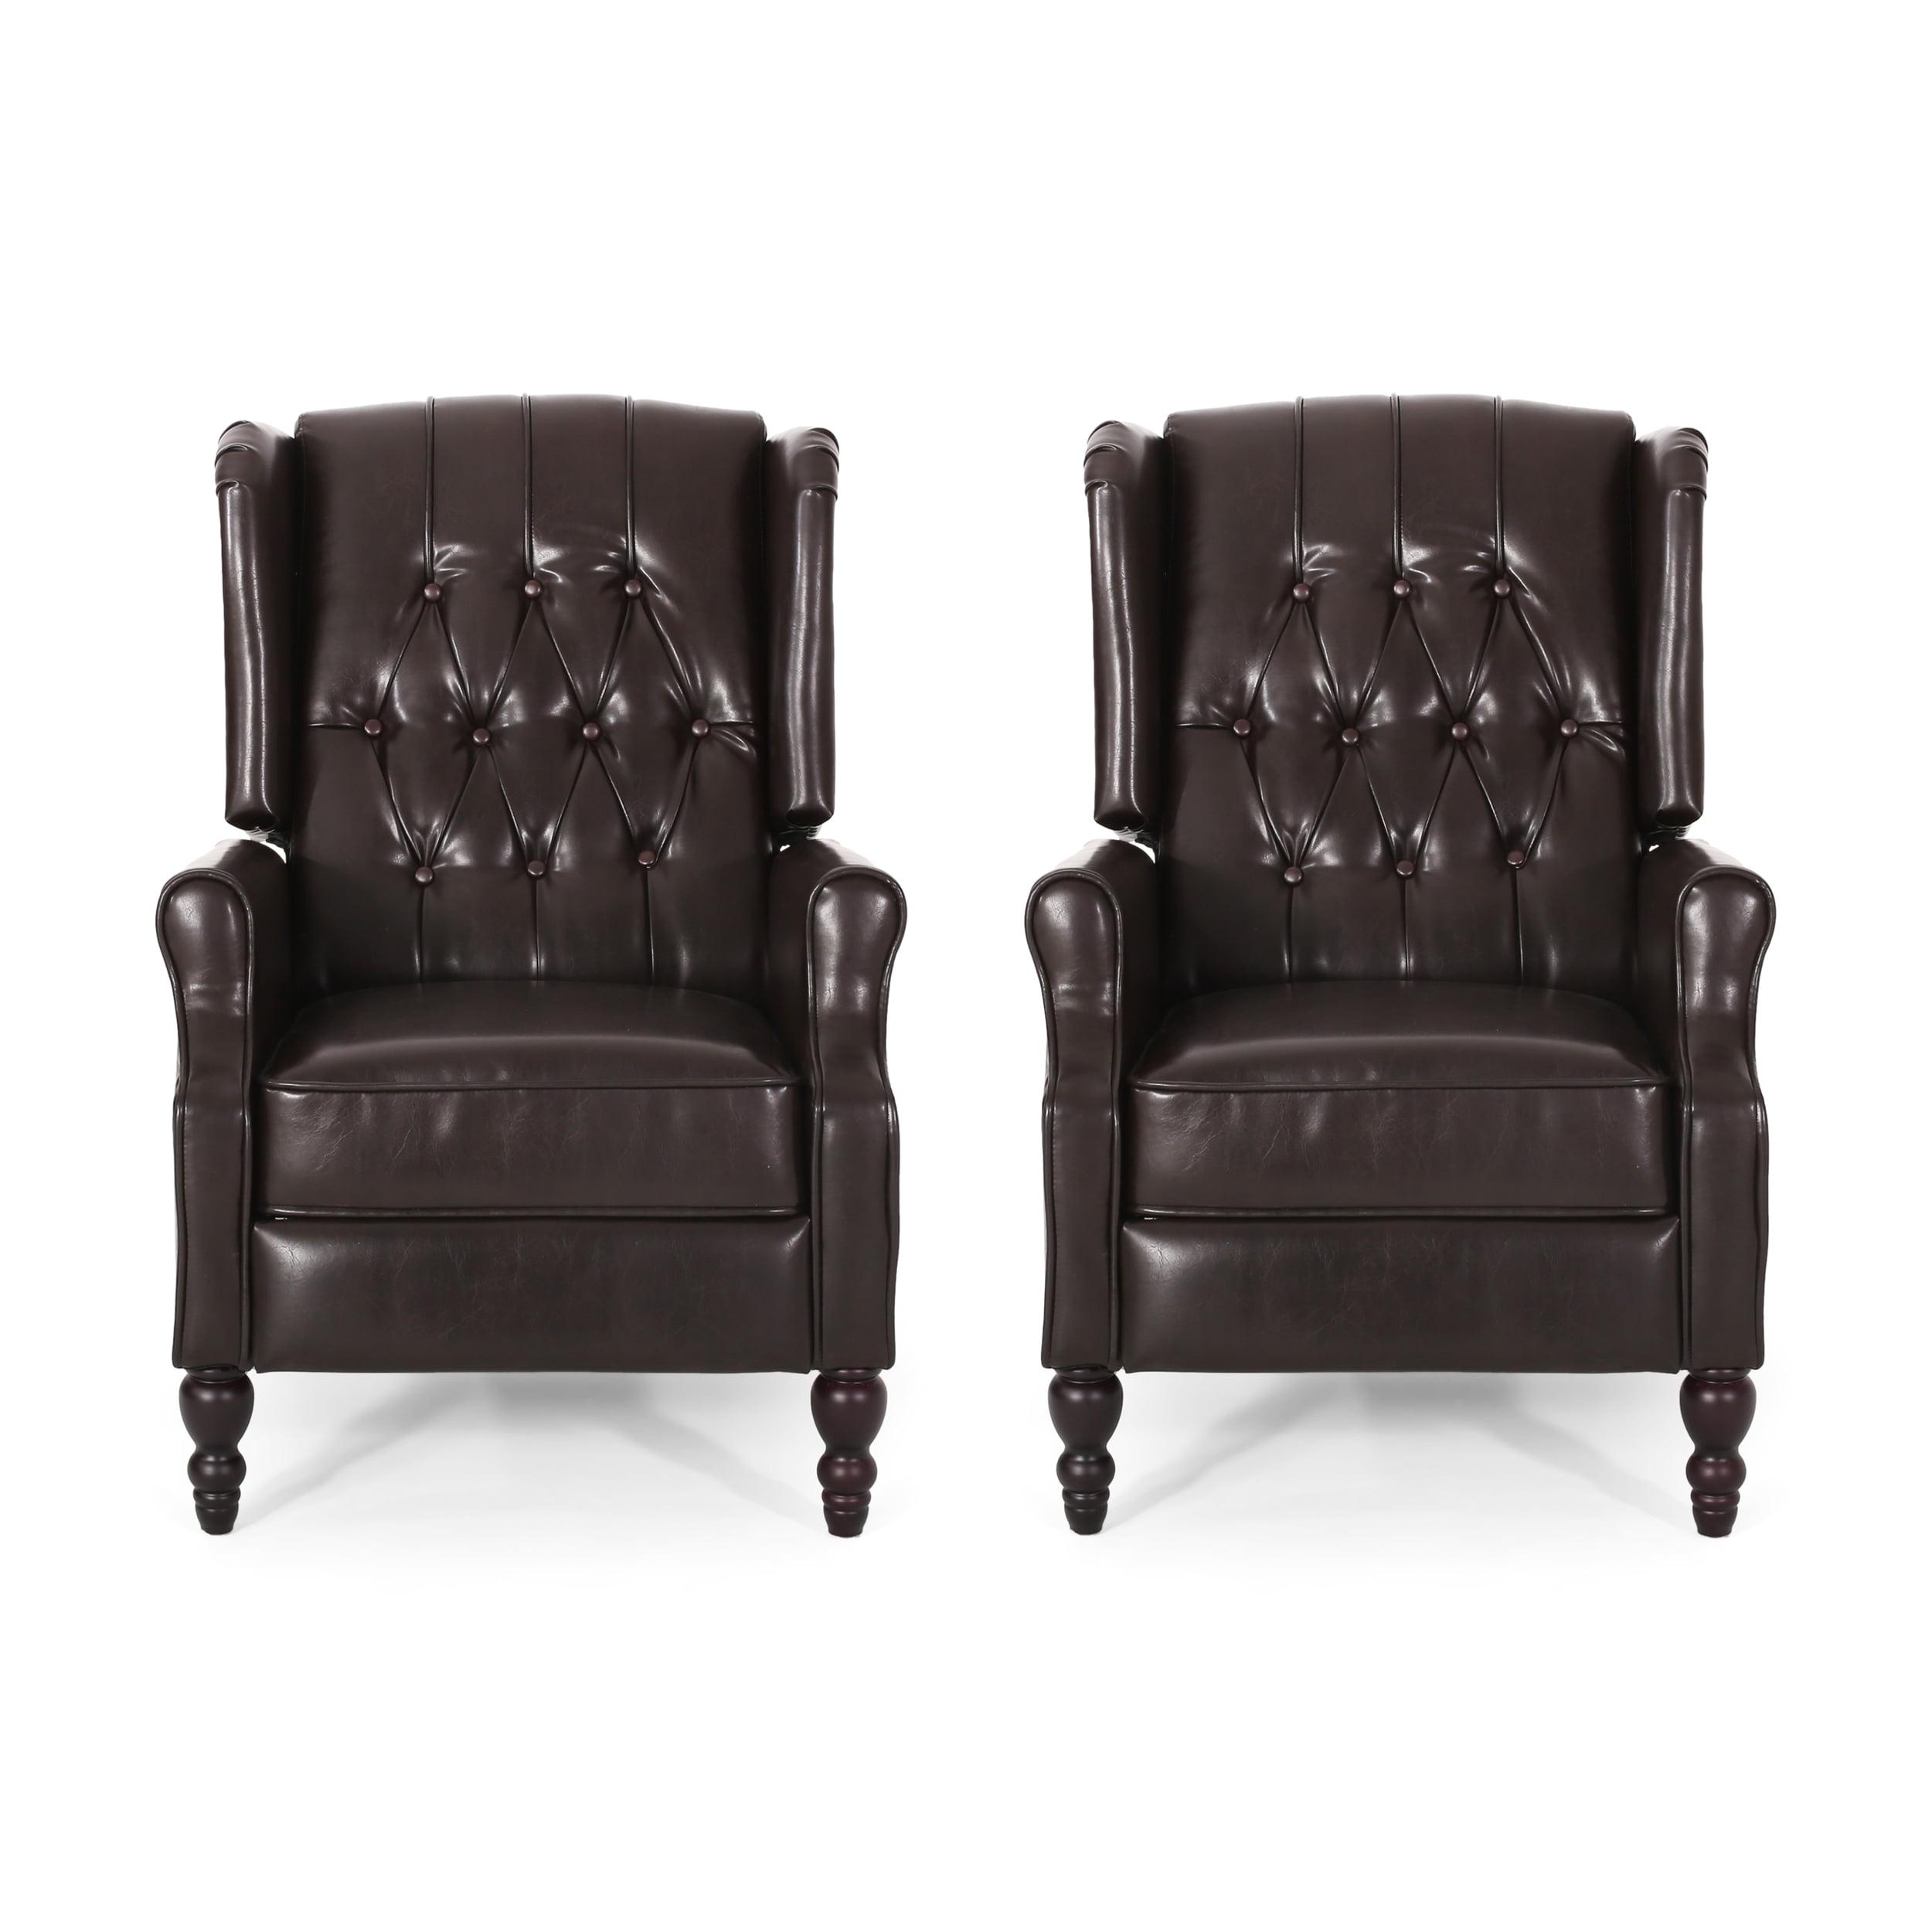 Handcrafted Brown Faux Leather Wing Chair Recliner, Set of 2